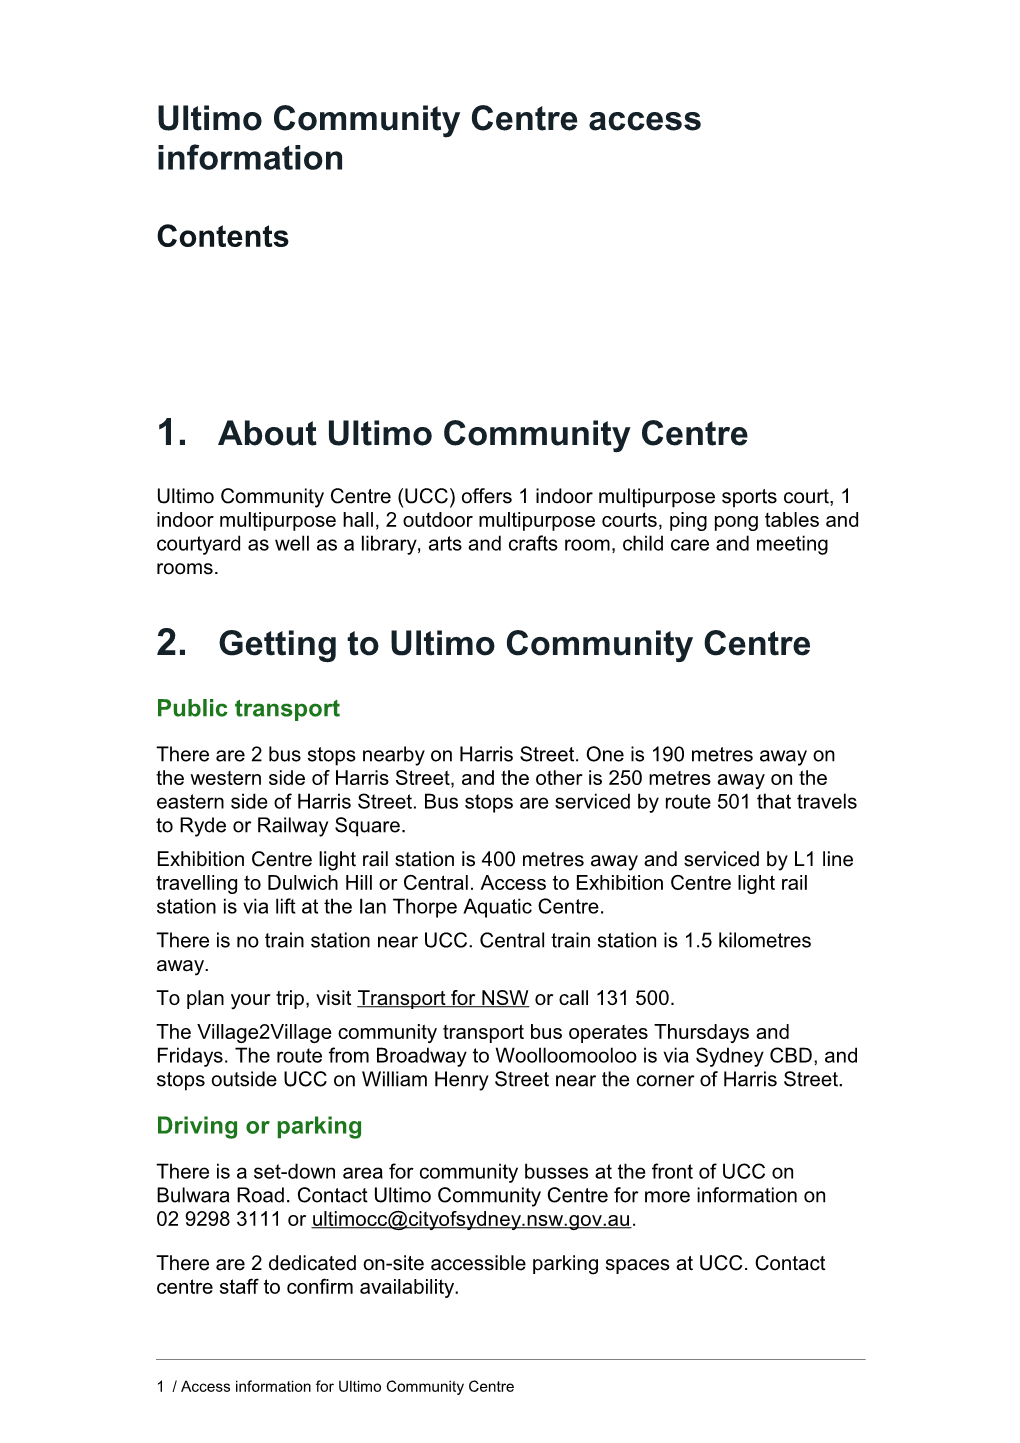 Ultimo Community Centre Access Information